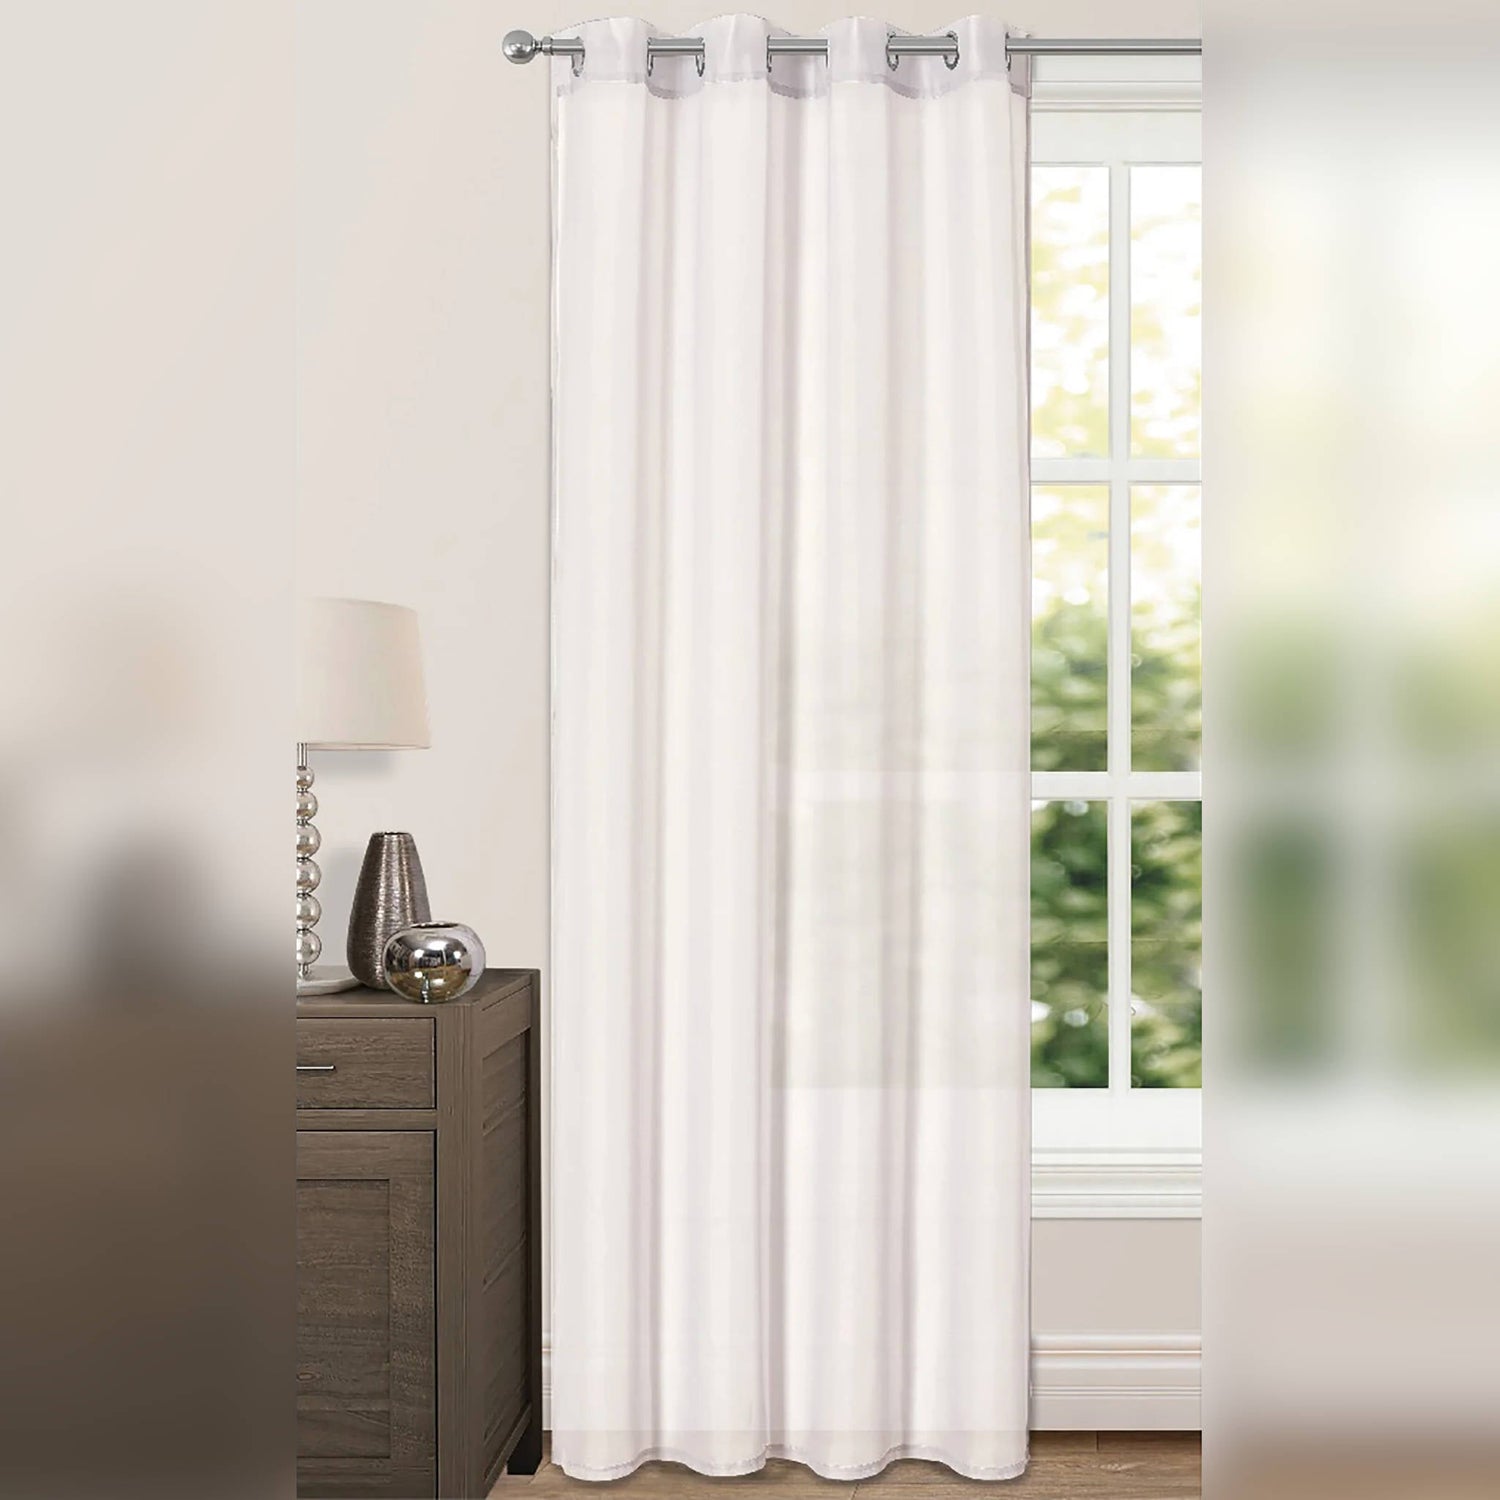 Intimates Riva Voile Panels Ring Top Eyelet Curtains | 59x90in